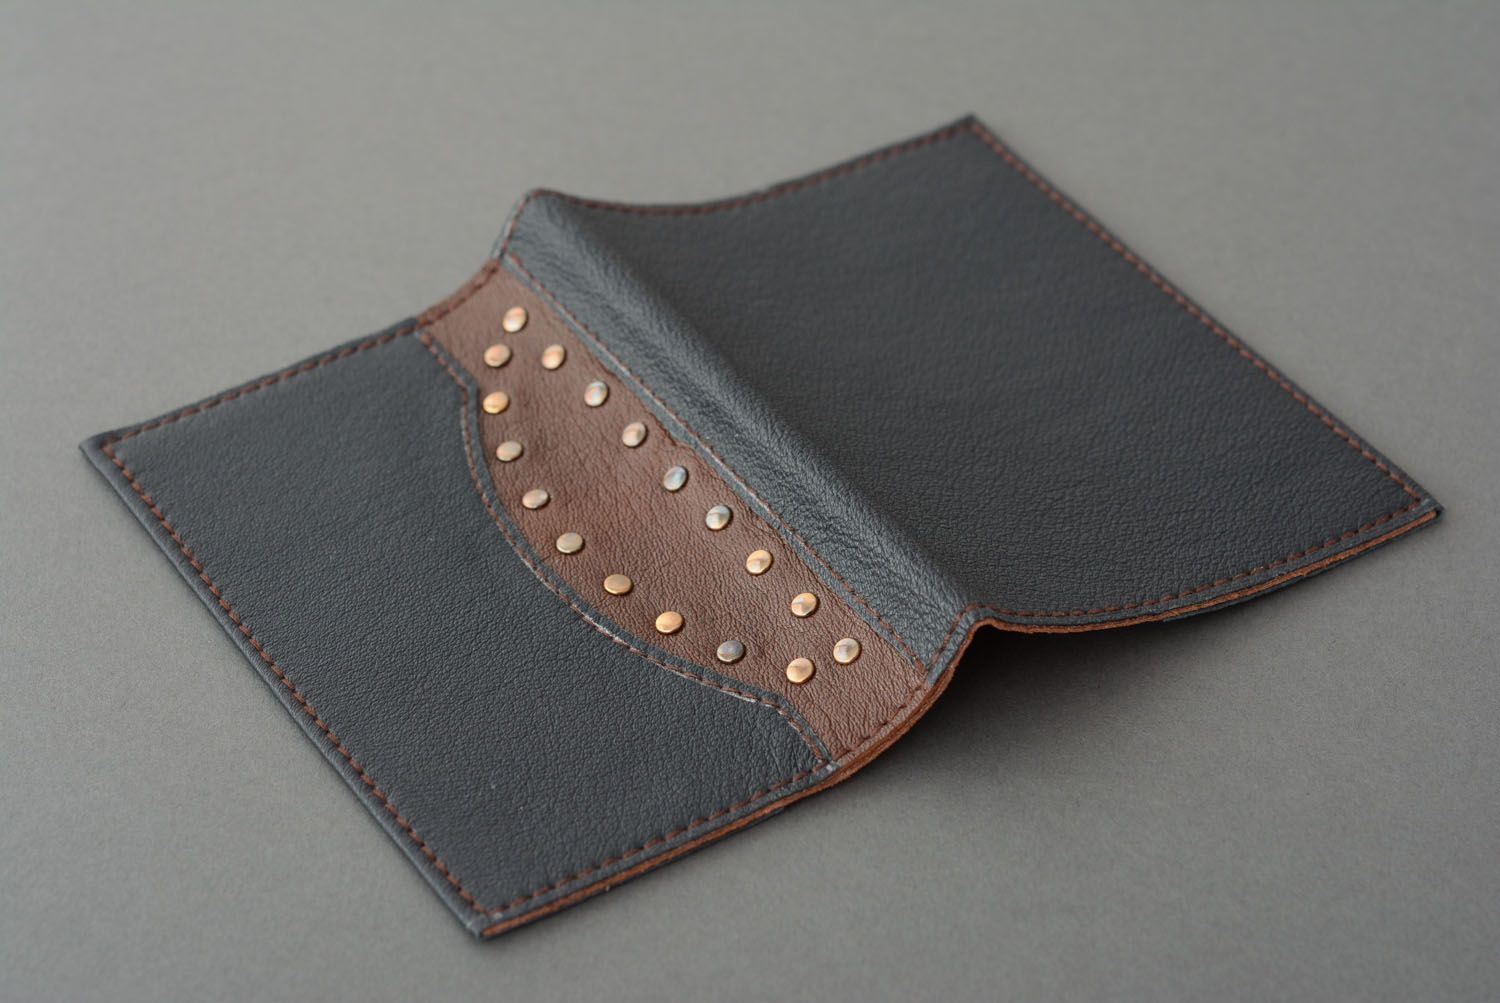 Passport cover made of leather photo 3